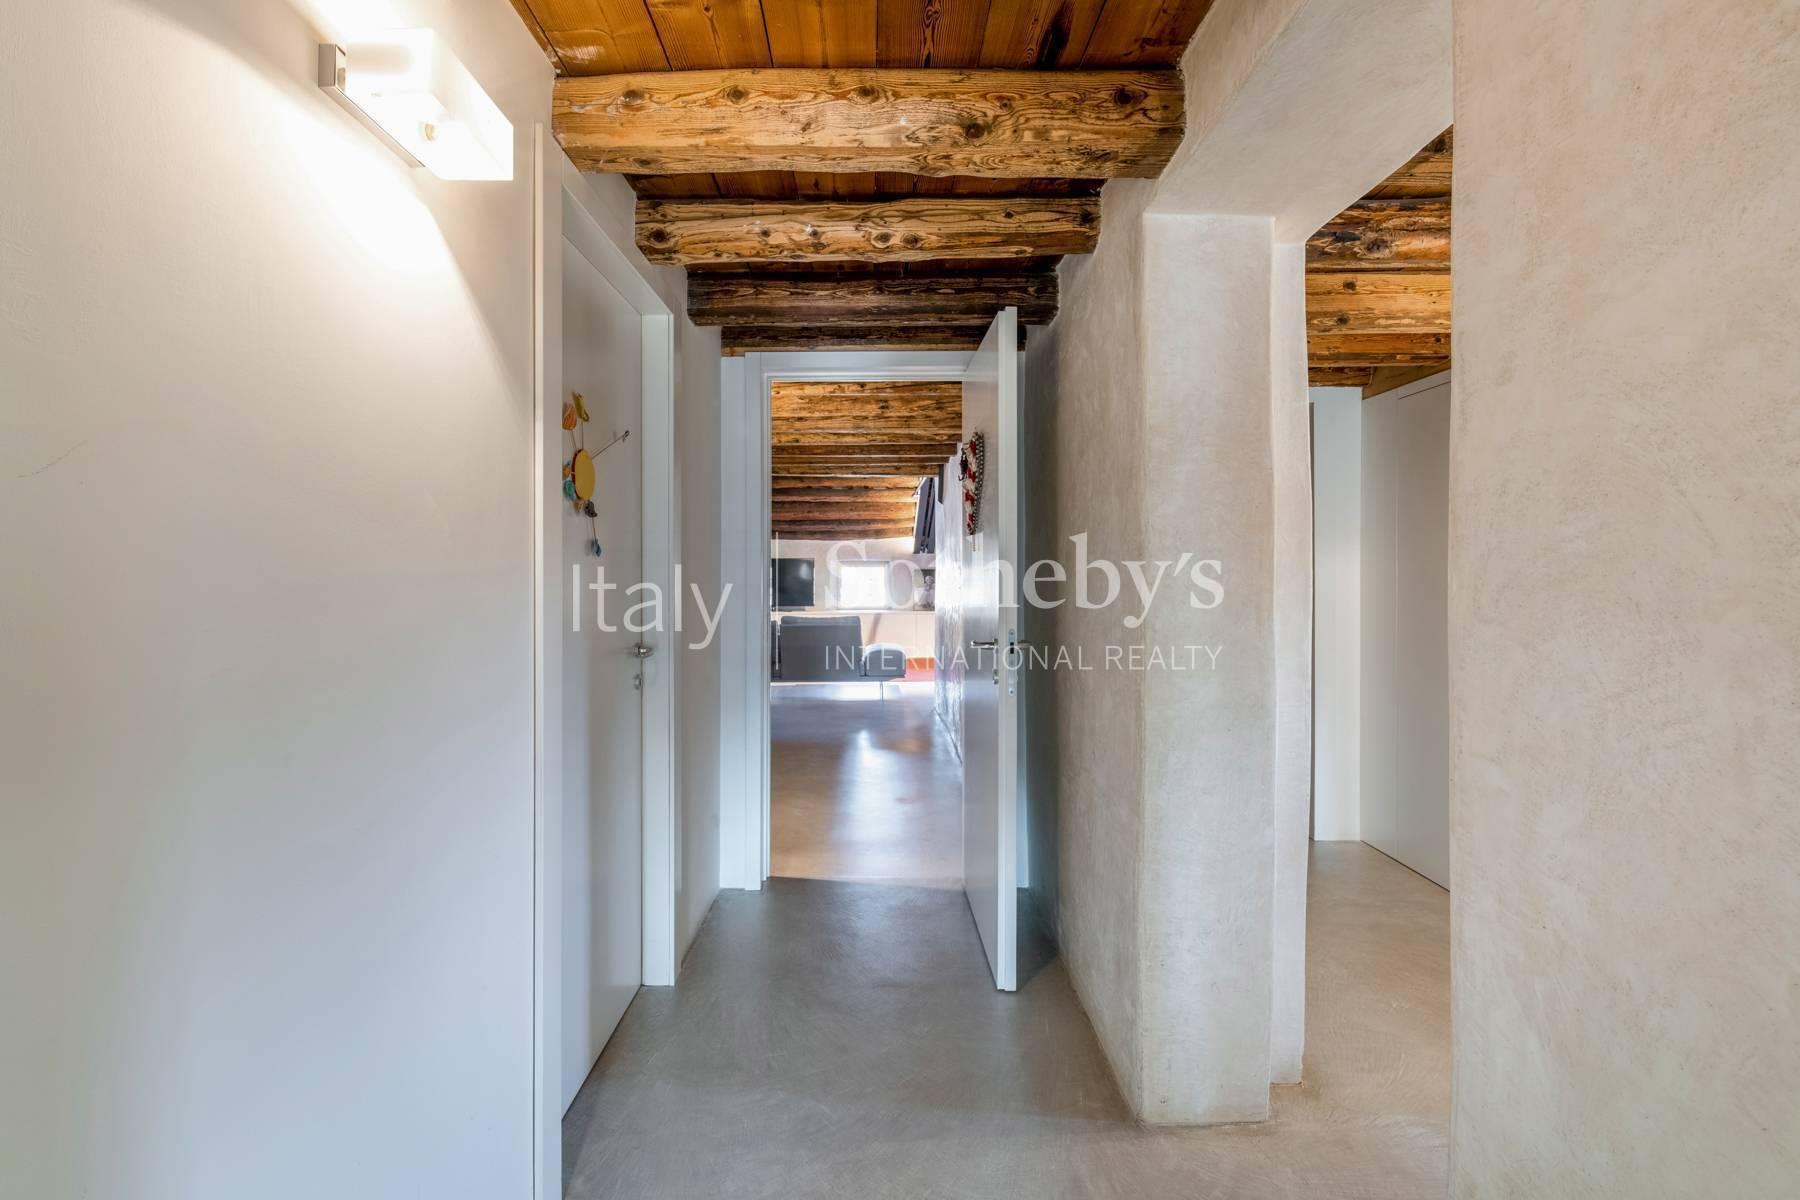 Luxurious penthouse on a 17th century Venetian Villa completely renovated - 8